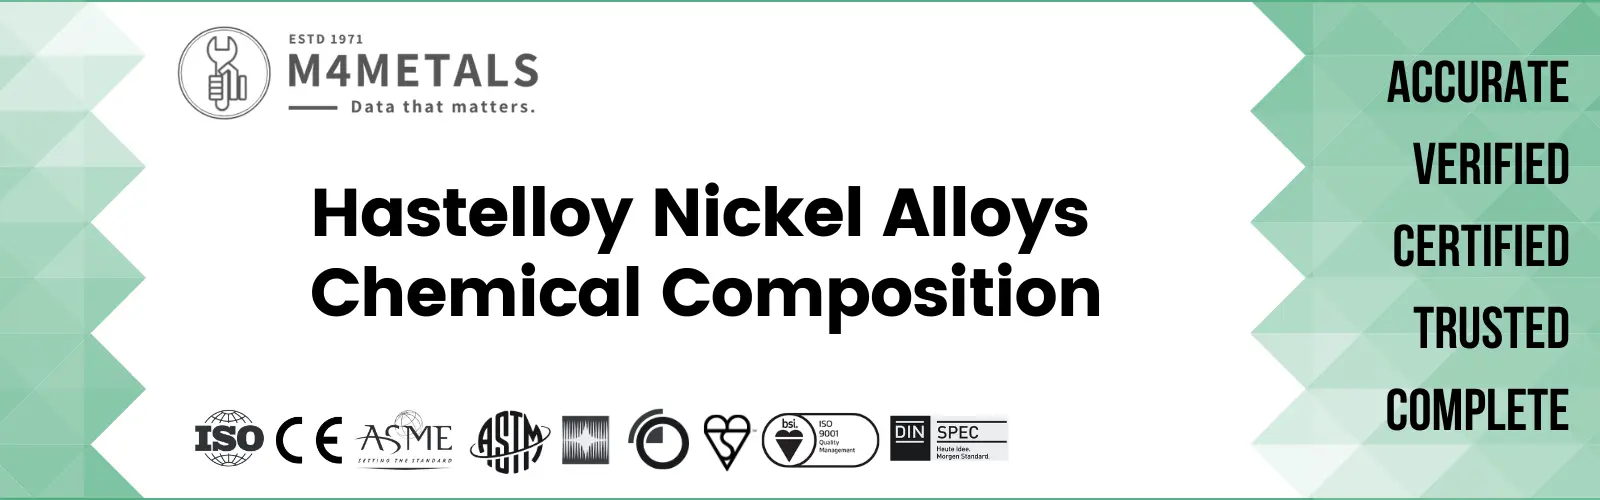 Hastelloy Nickel-alloy Chemical Composition